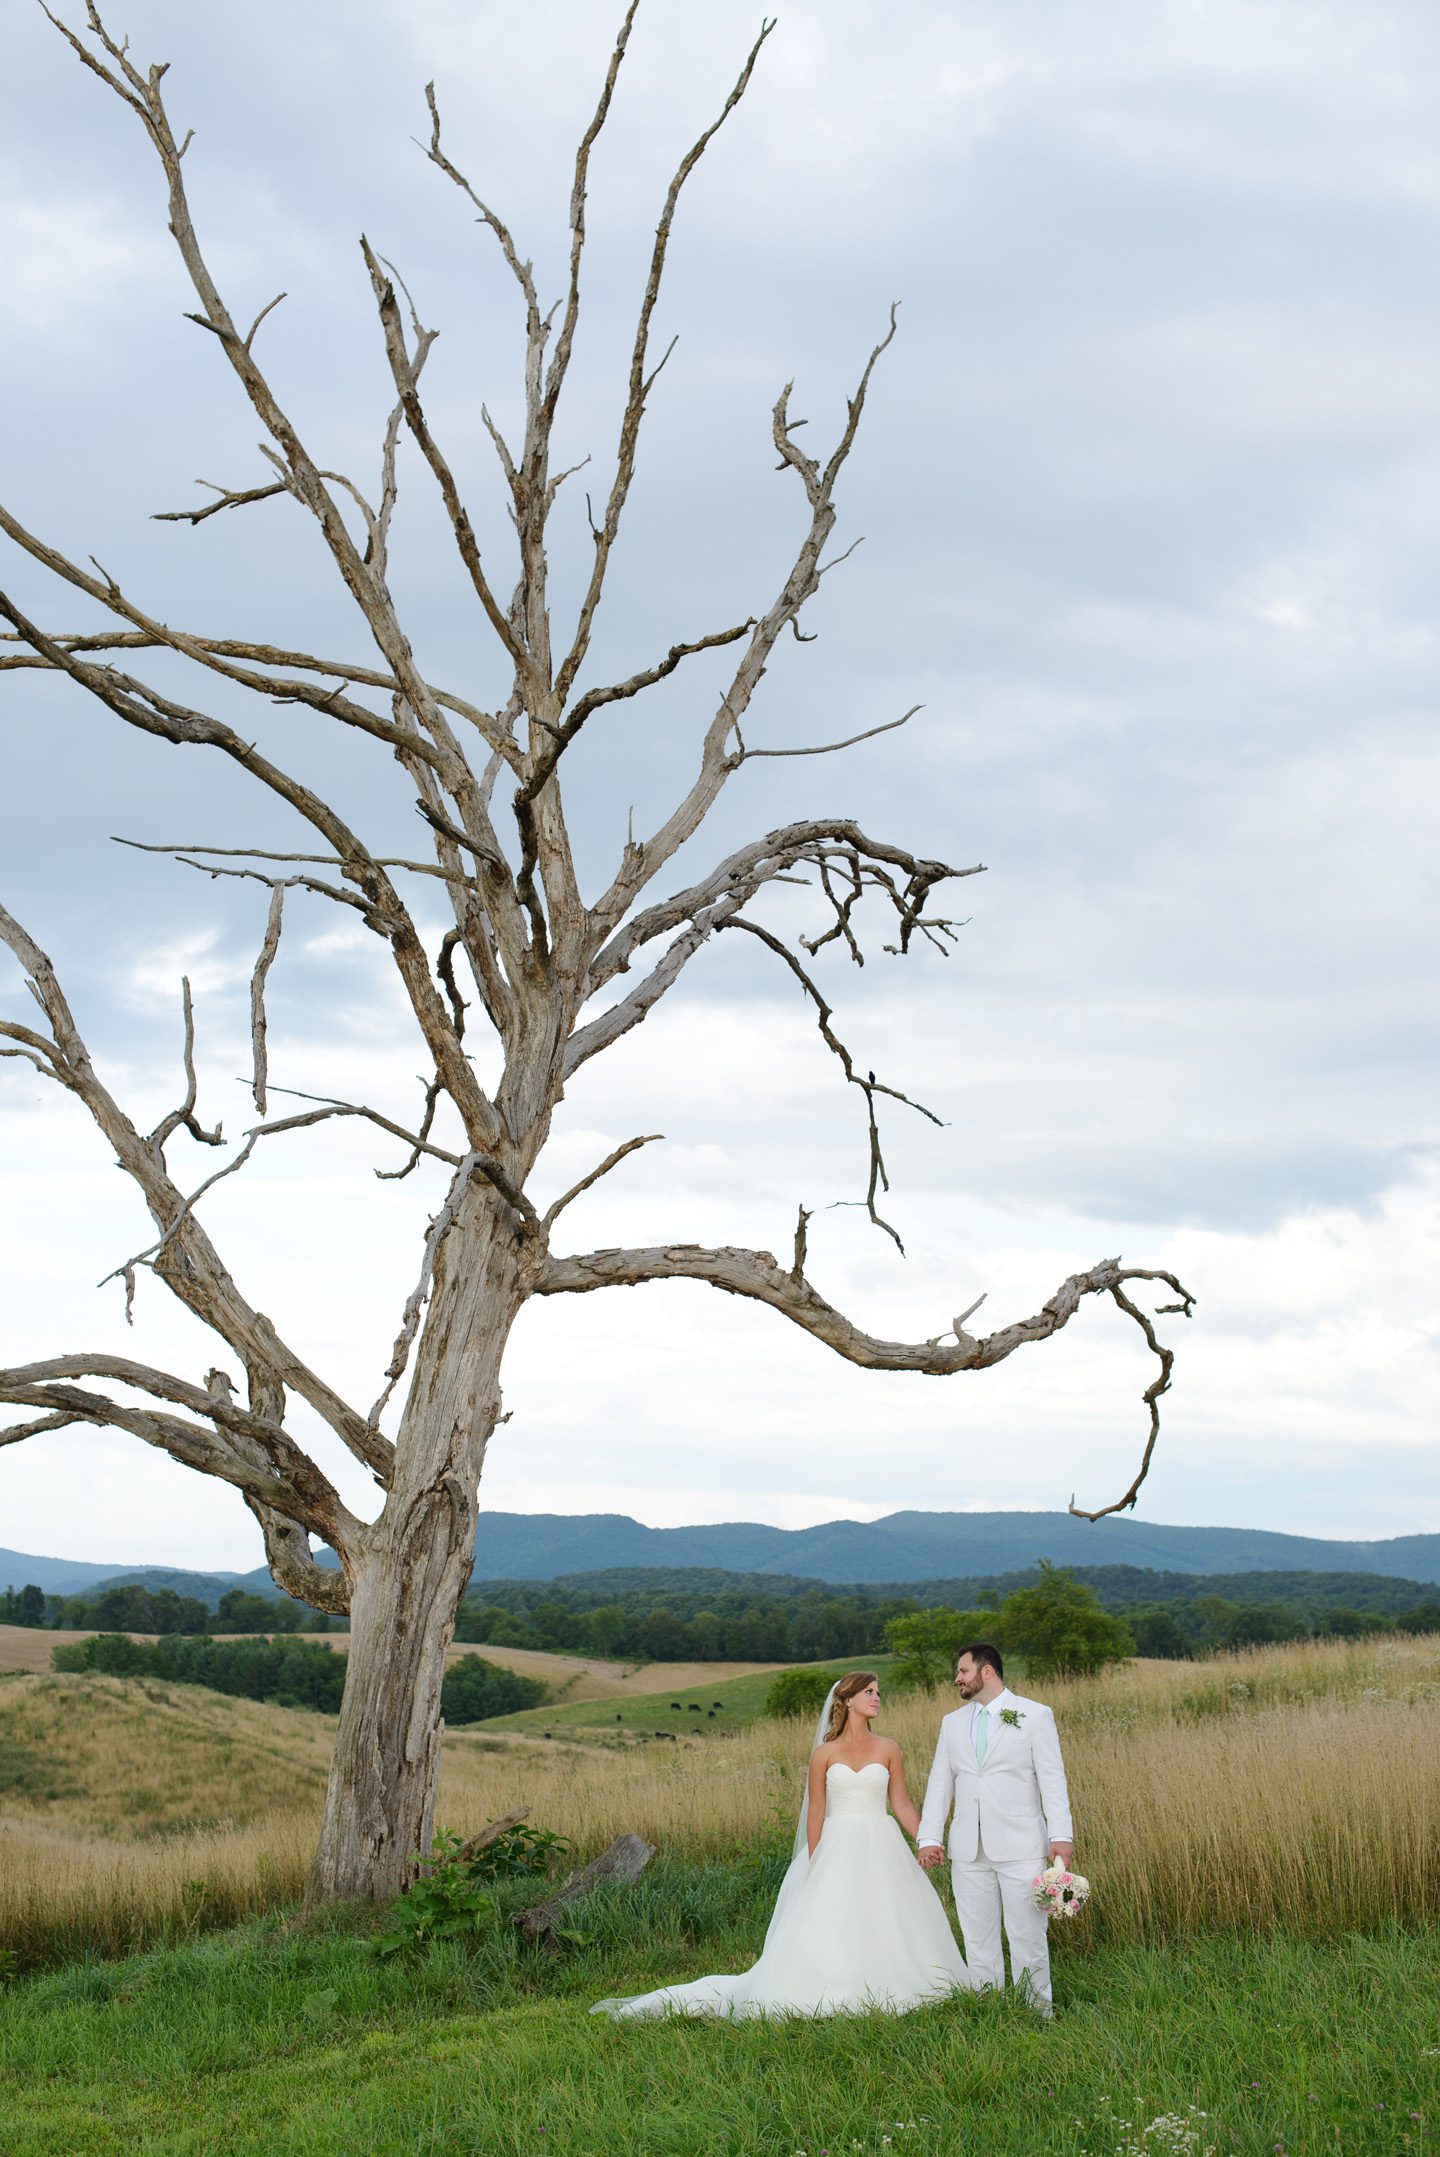 Kelly and Nathan by Neil GT Photography Sinkland Farms Christiansburg VA Wedding Old Tree Portrait